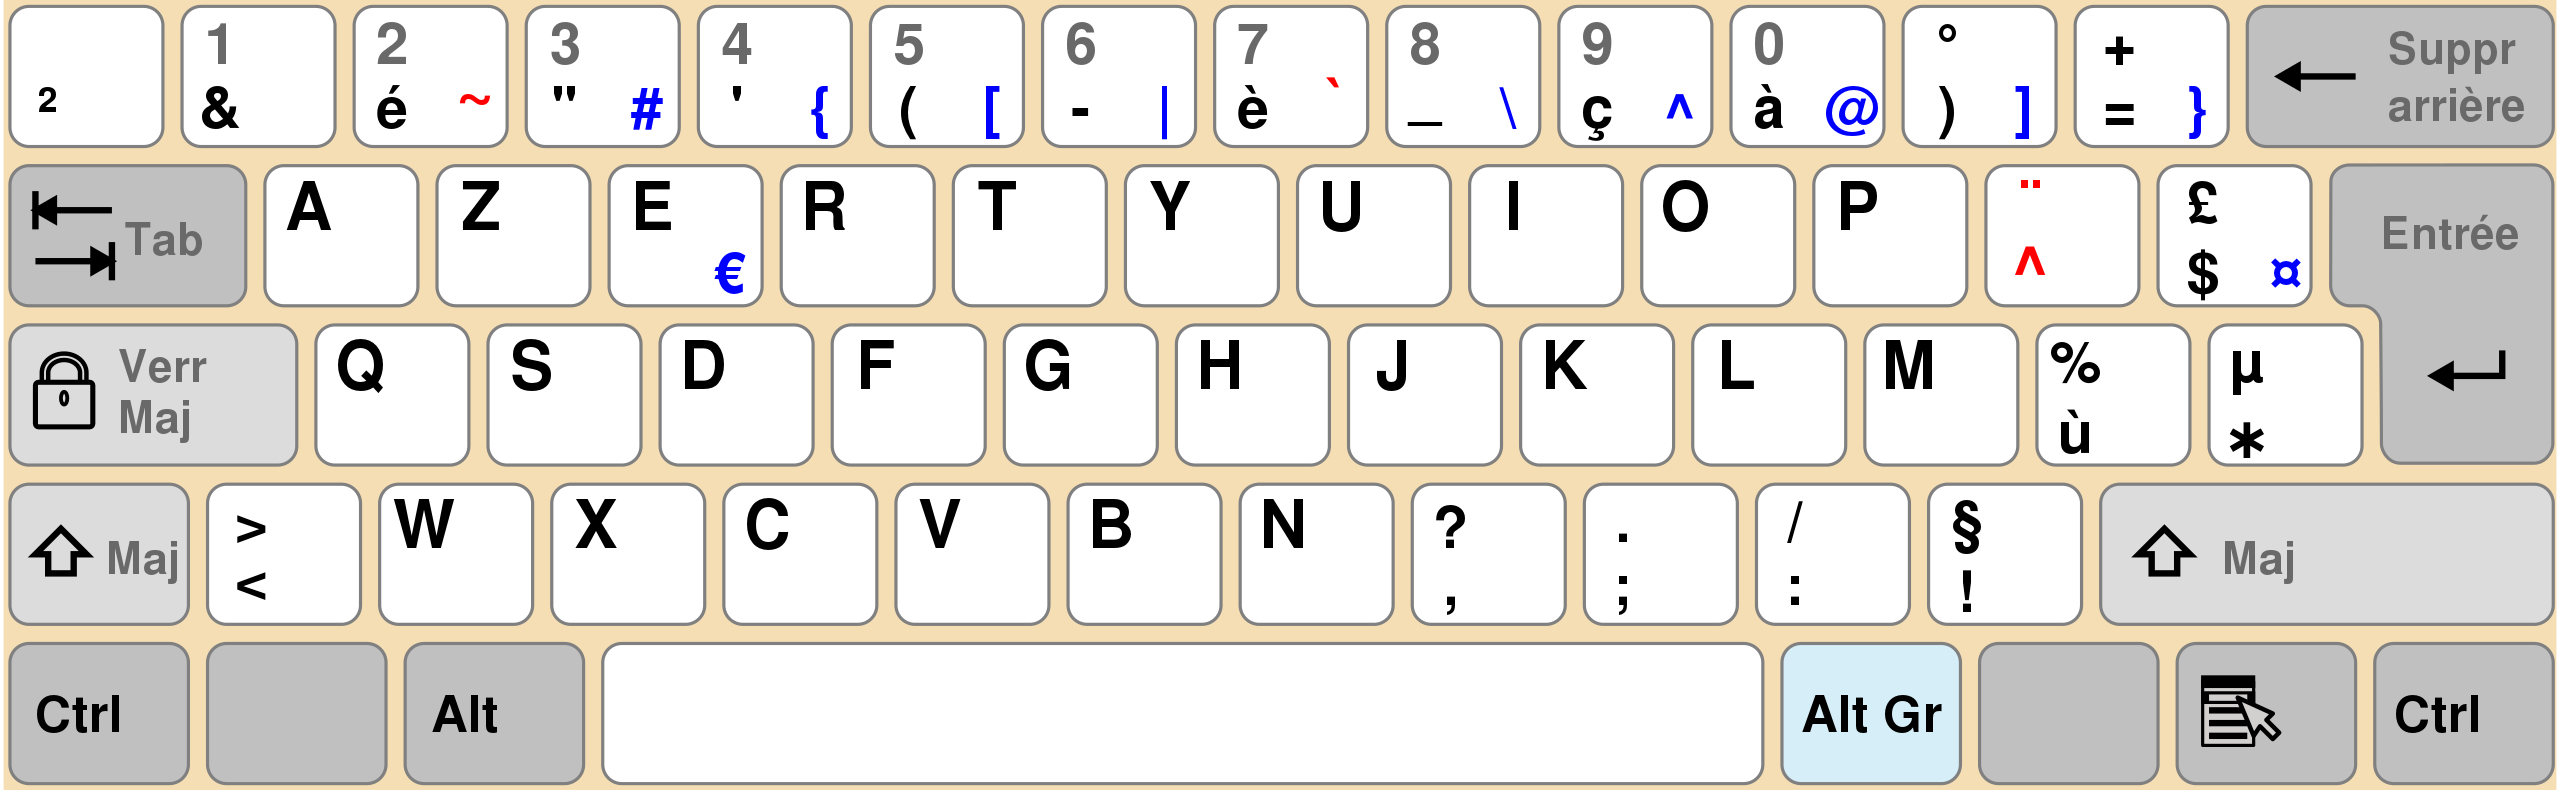 2560px-Clavier-Azerty.svg.png